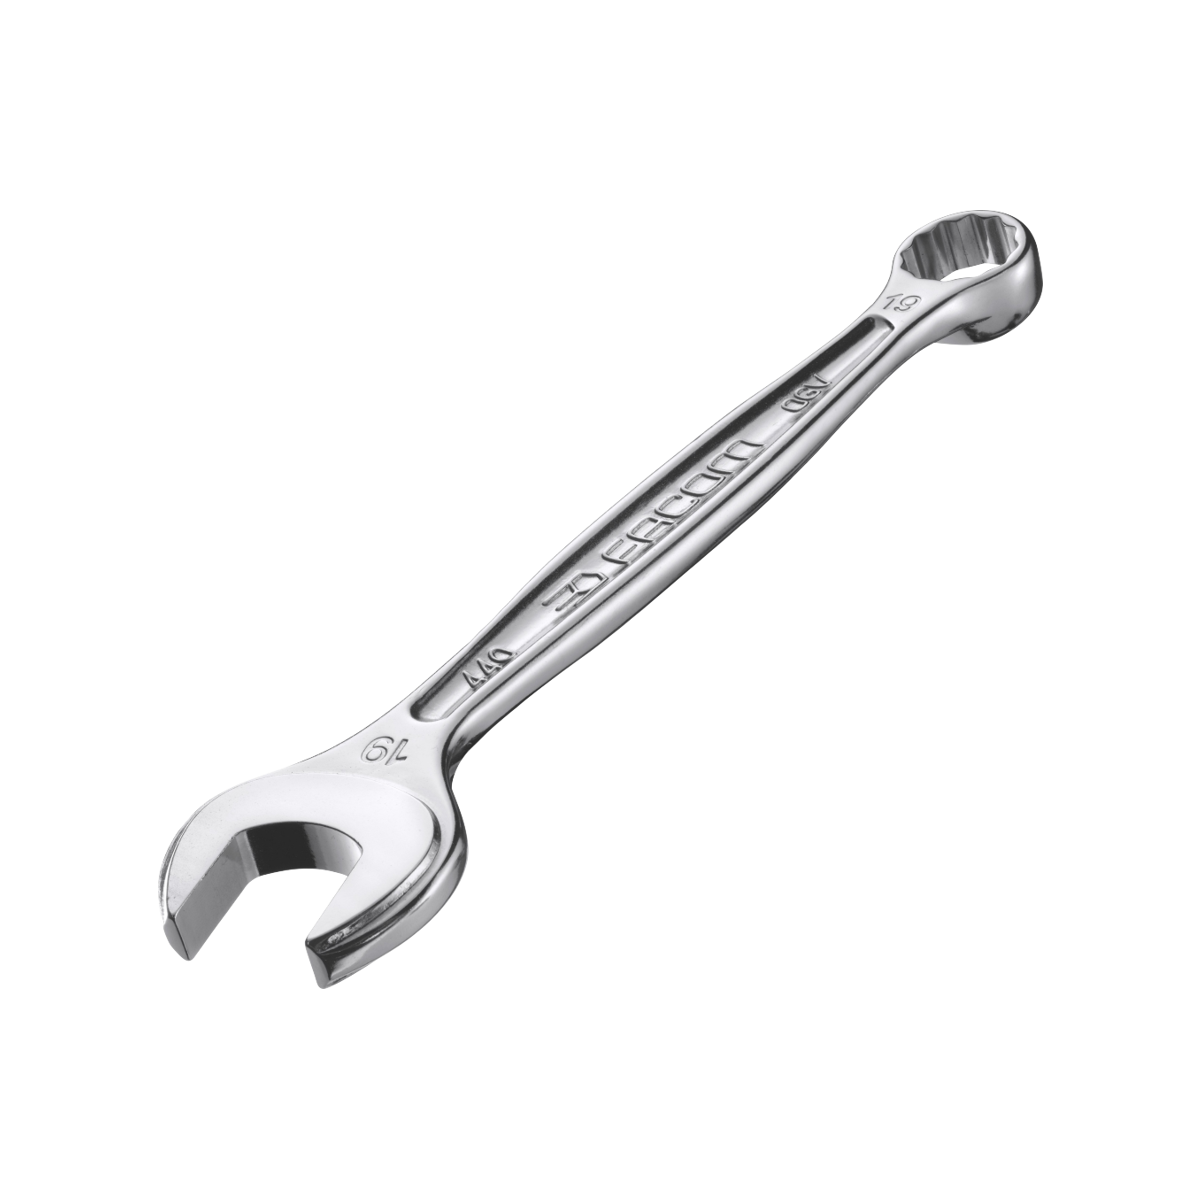 Facom 75 Forged Imperial AF Angled 6 Point Socket Wrench 9/16 